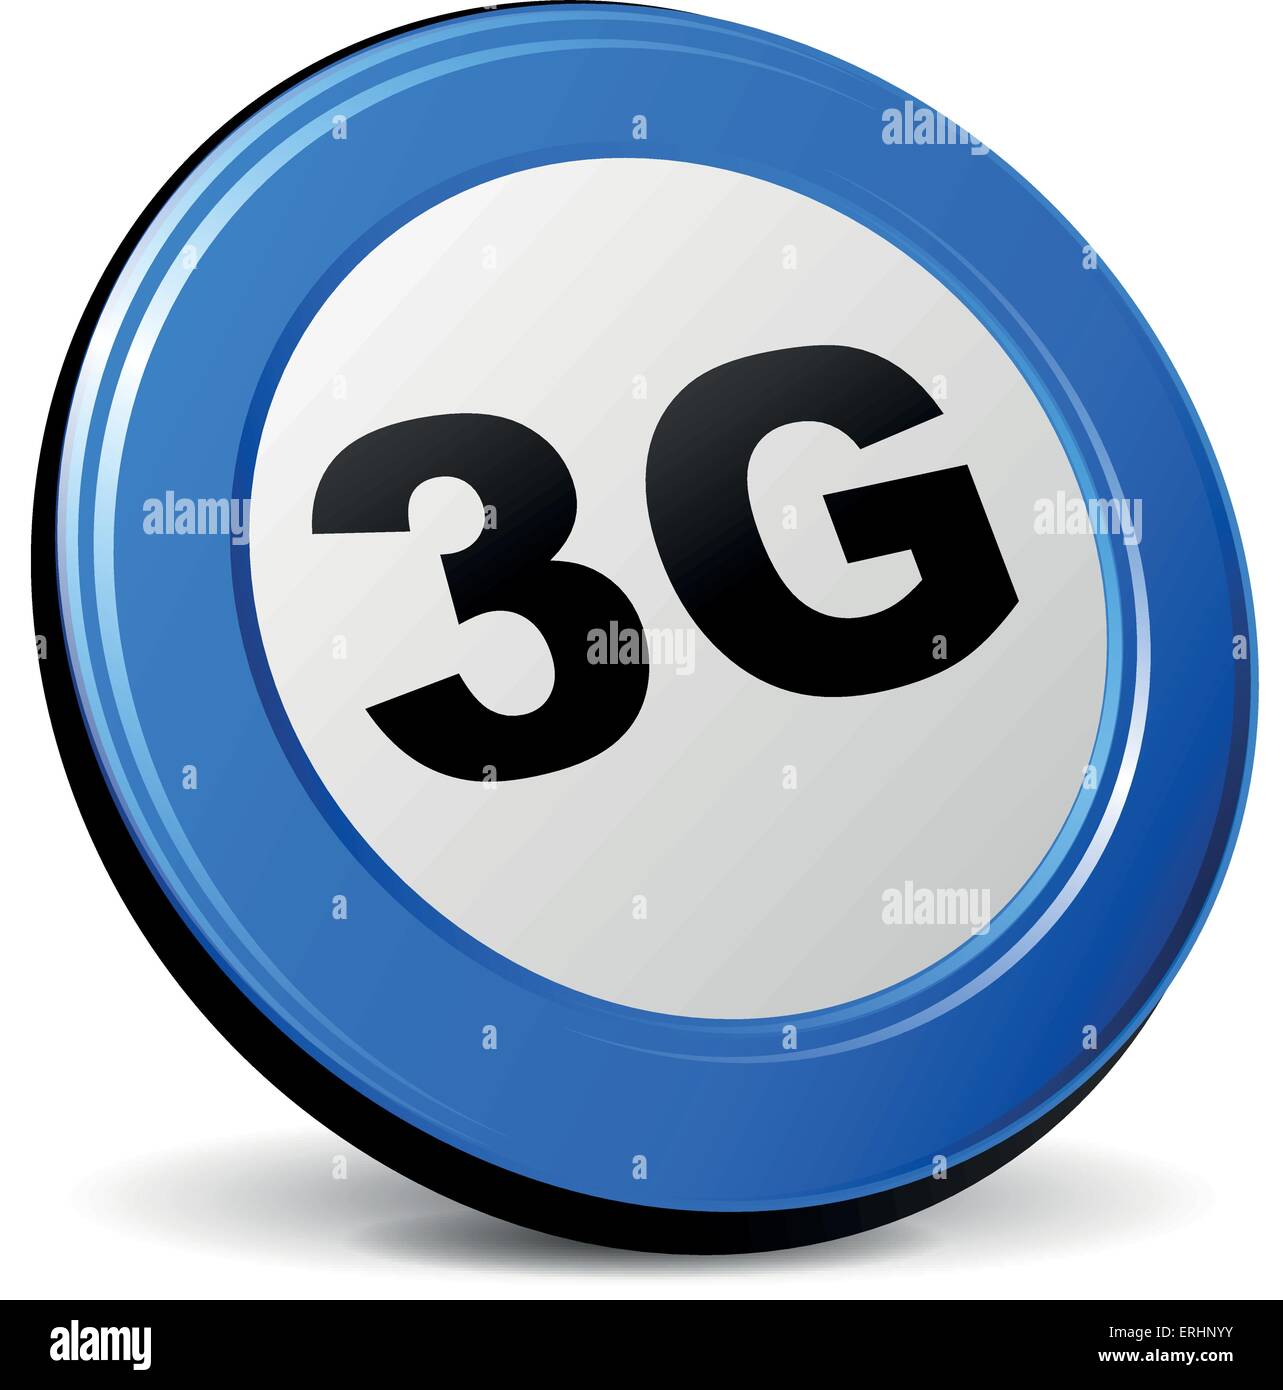 Vector illustration of 3g icon on white background Stock Vector